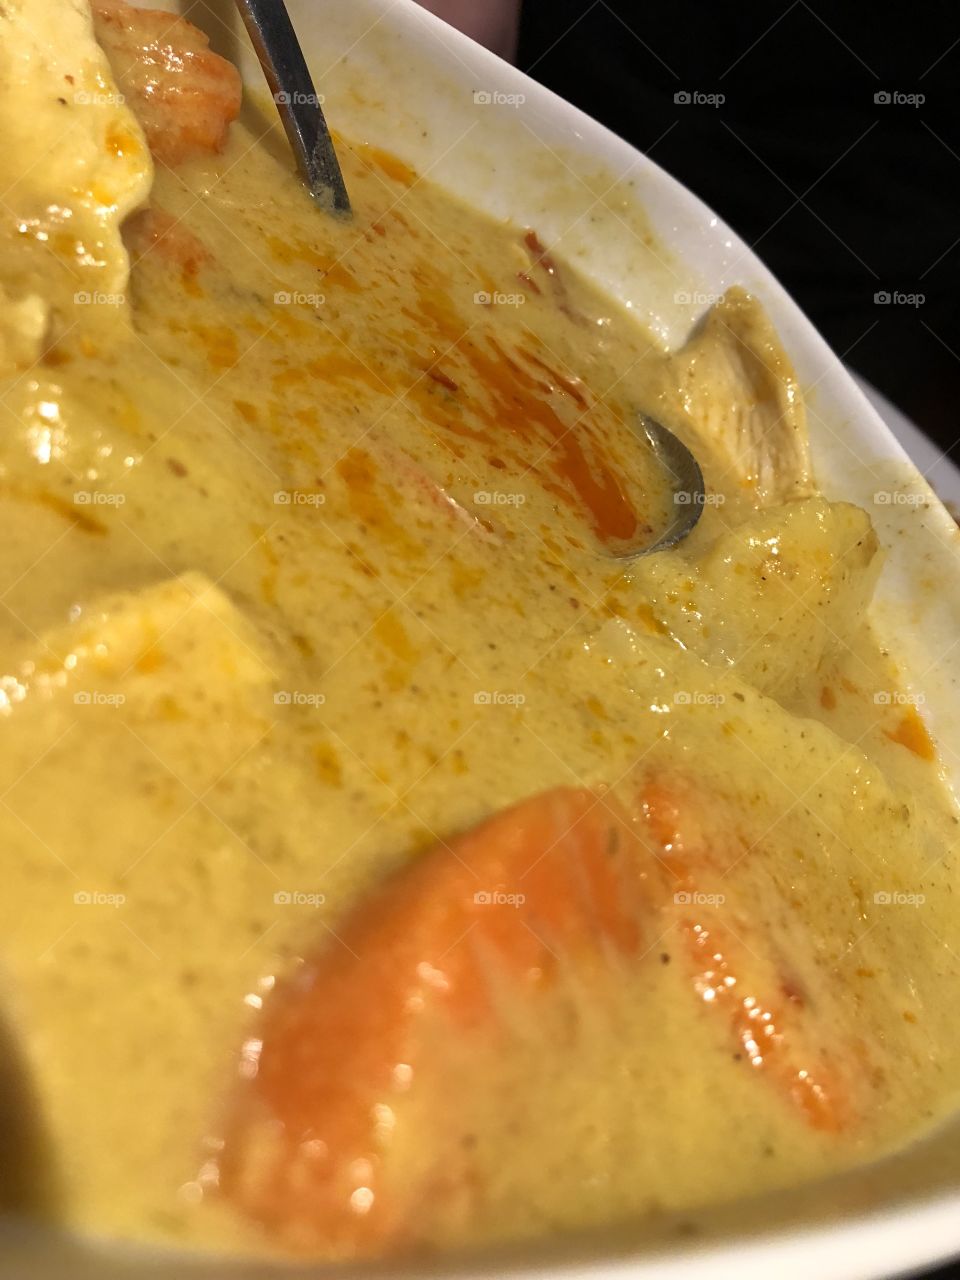 Delicious yellow curry with a hint of spice is the perfect warm meal for a cold winter night. 